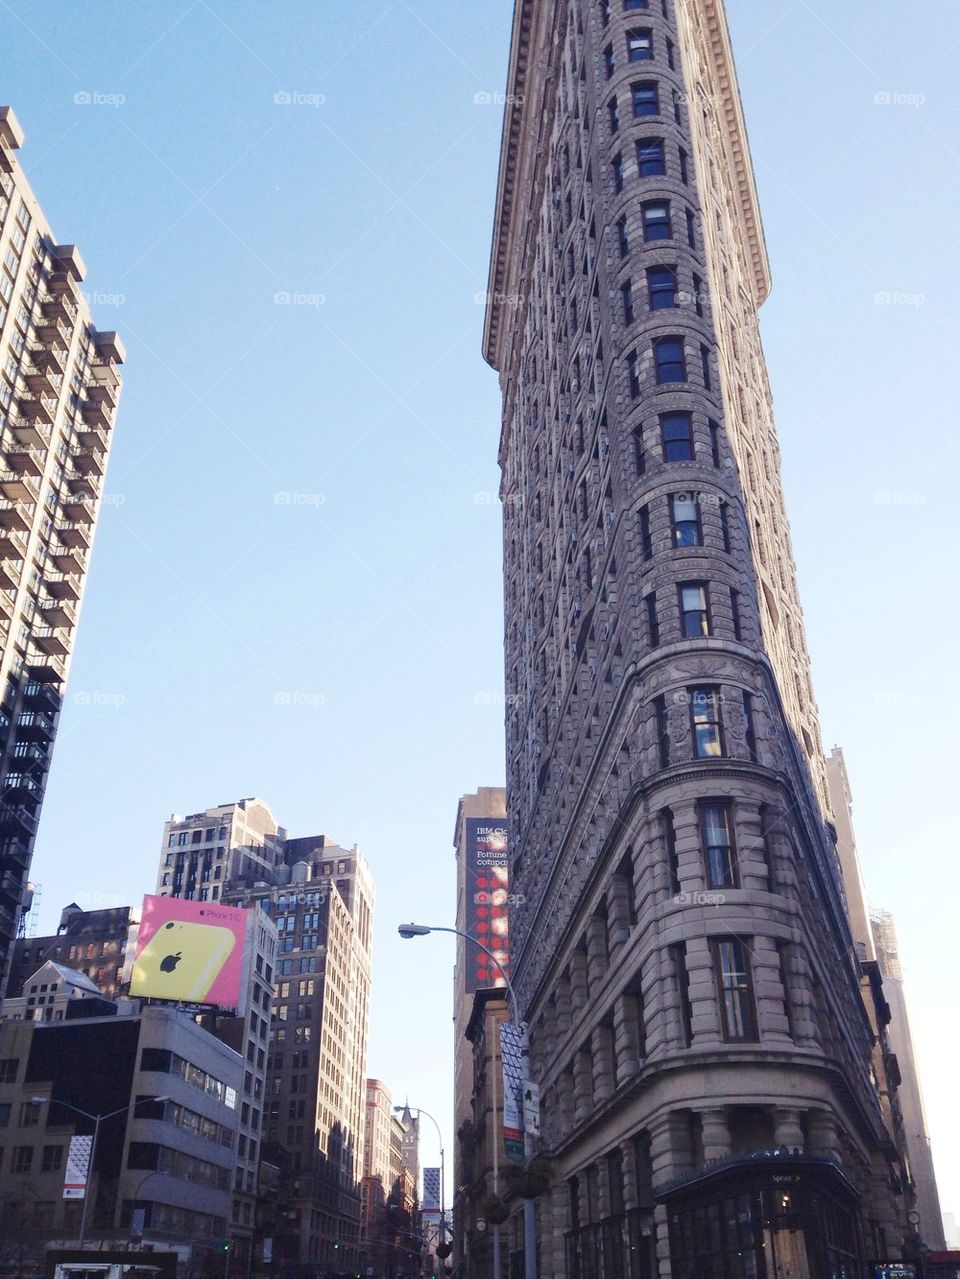 Flat iron building in NYC